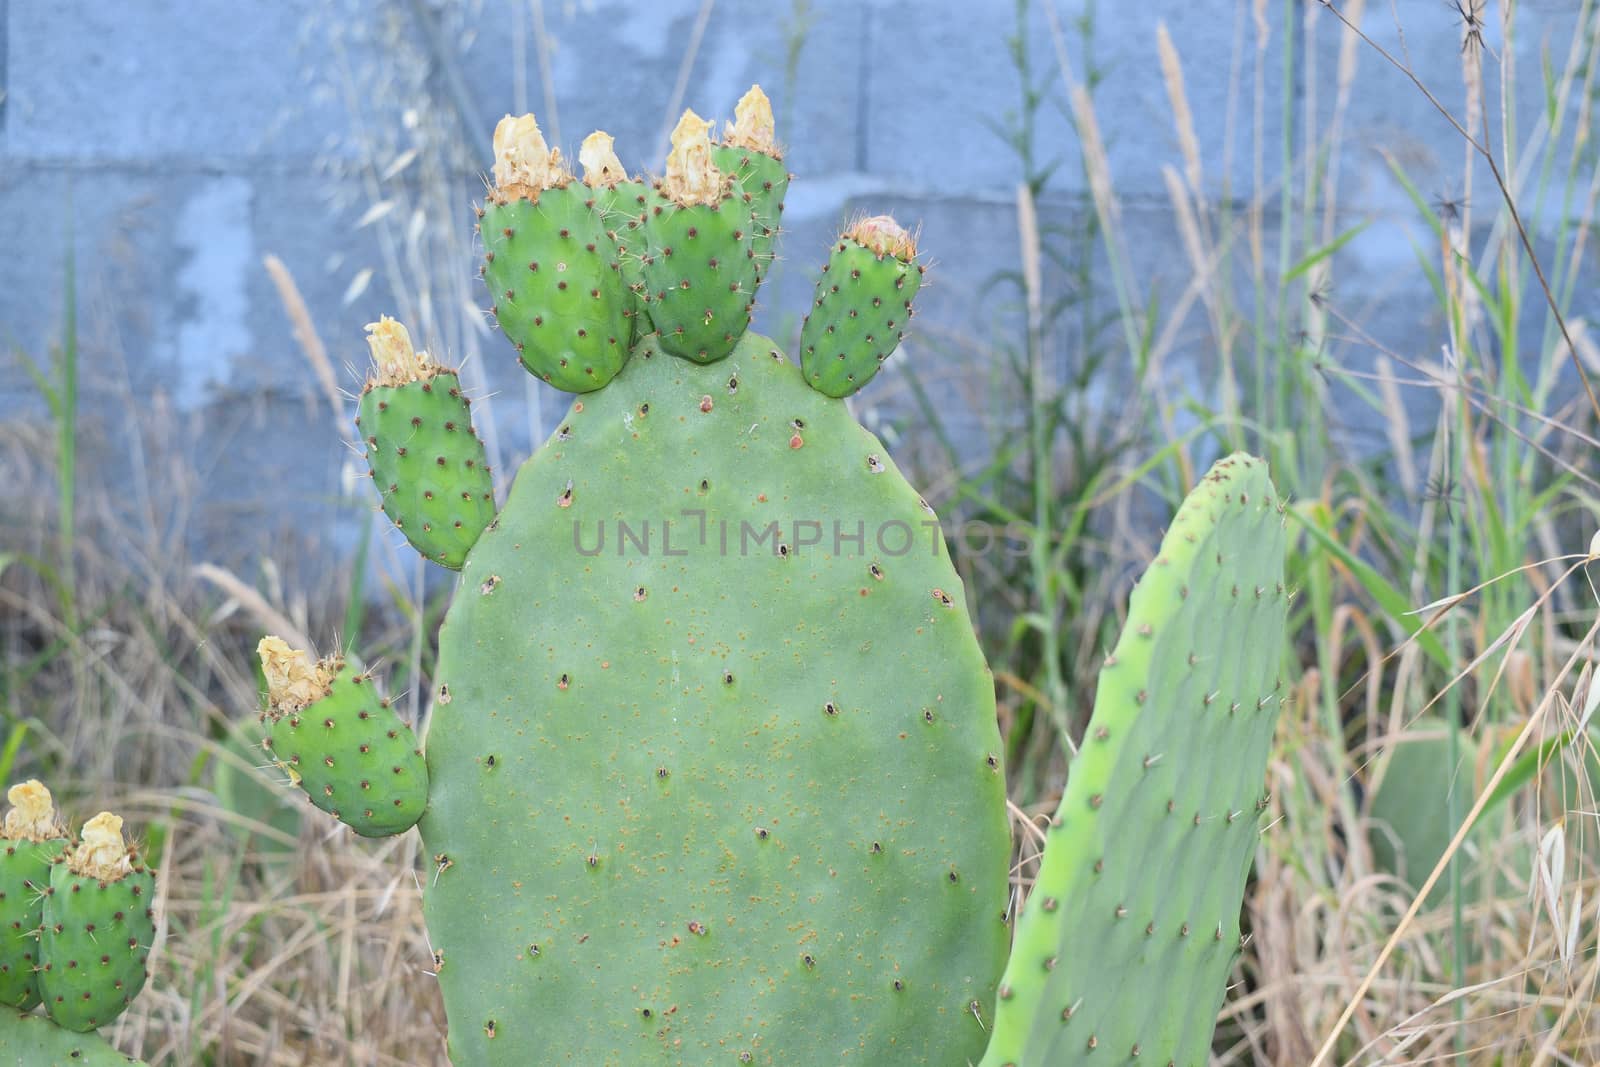 prickly pears on the plant unripe